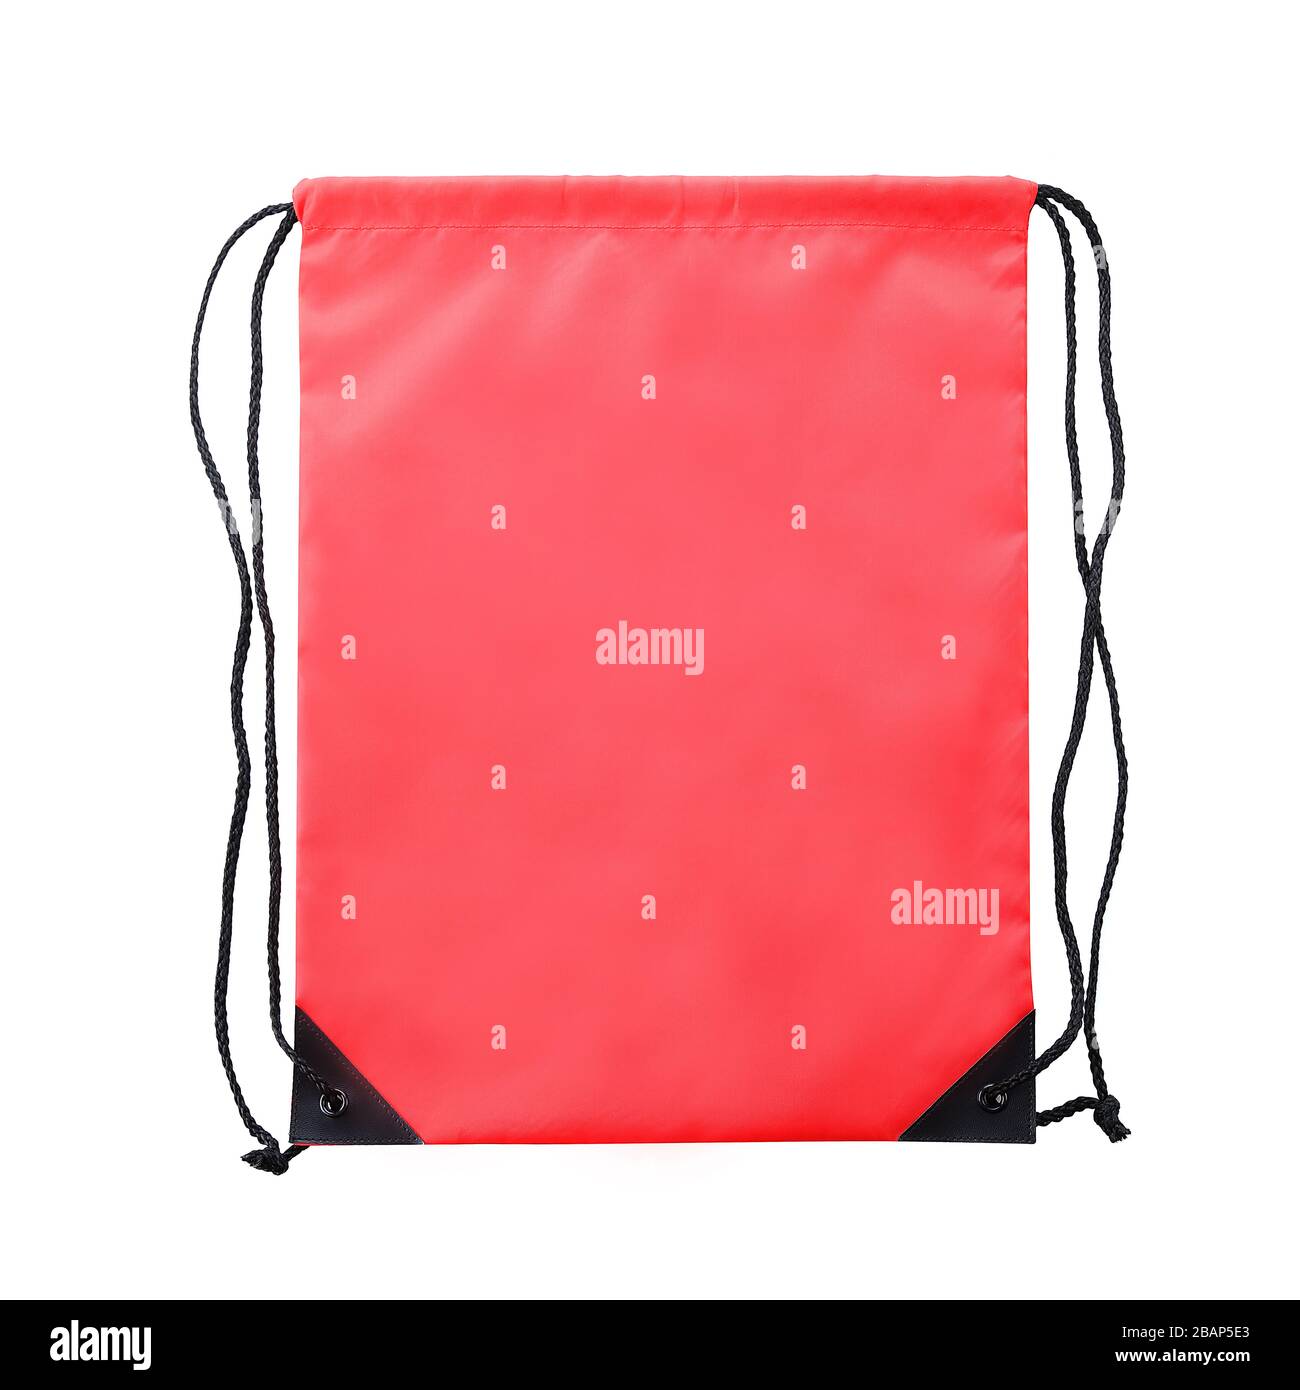 Red drawstring bag with string at both side. polyester material. For mock up, advertising & e-commerce. Studio shot isolated in white background Stock Photo